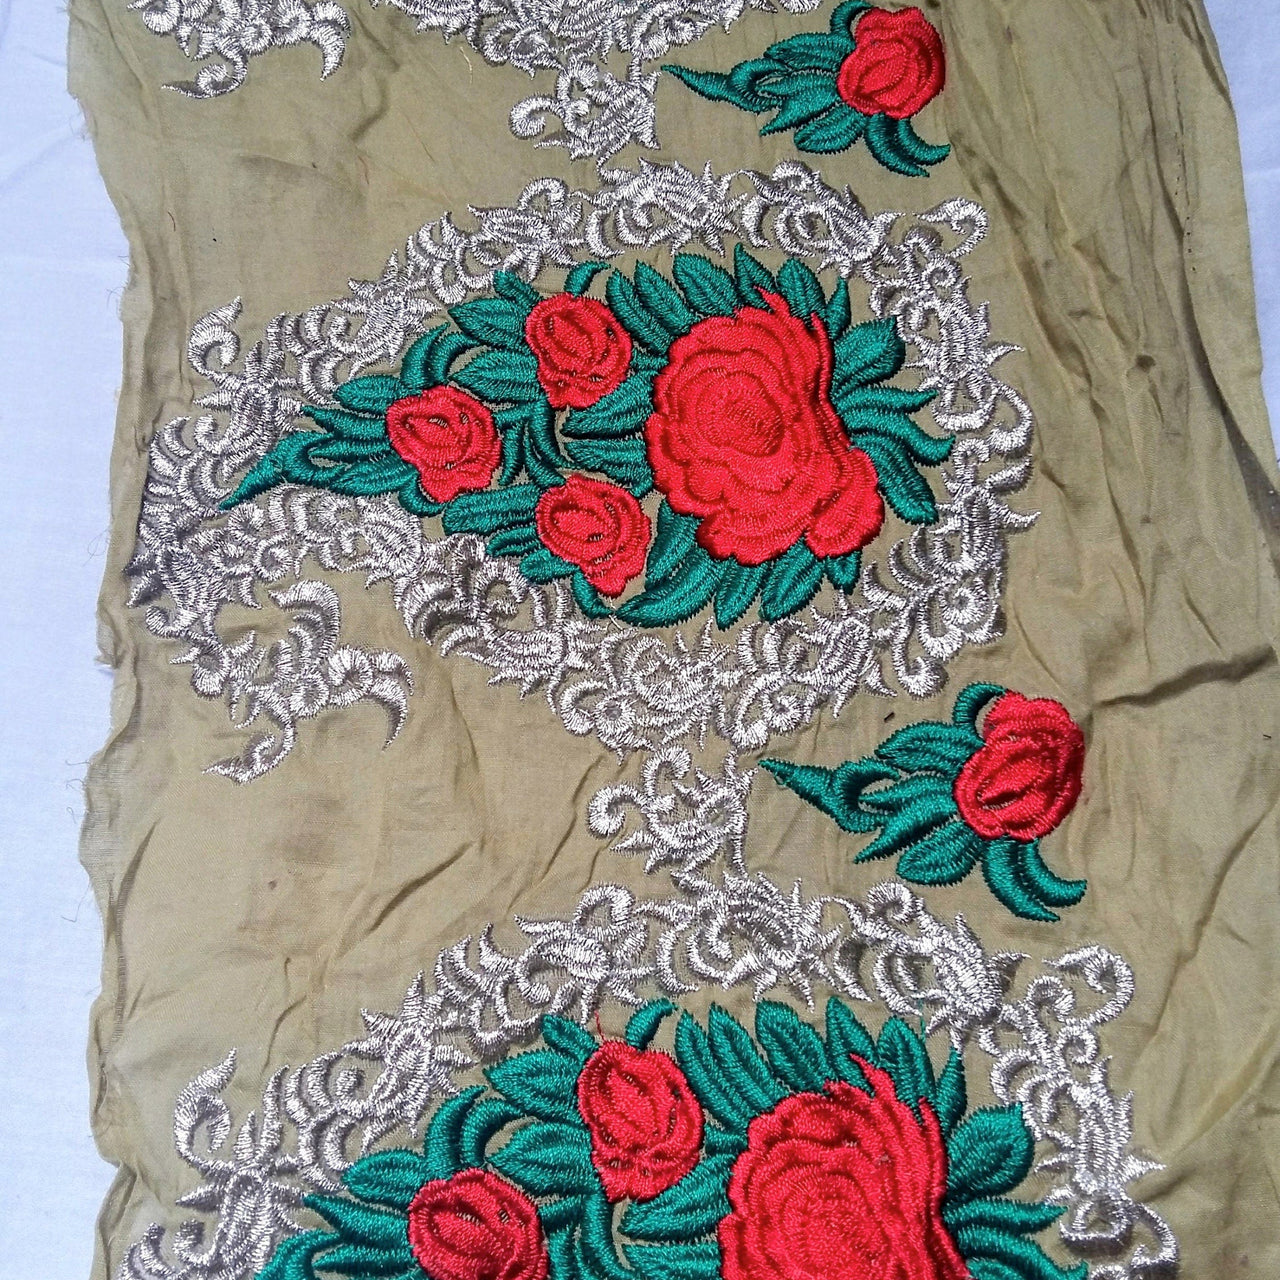 Black / Olive Green Silk Fabric Trim With Red, Green And Gold Floral Rose Embroidery, Indian Laces